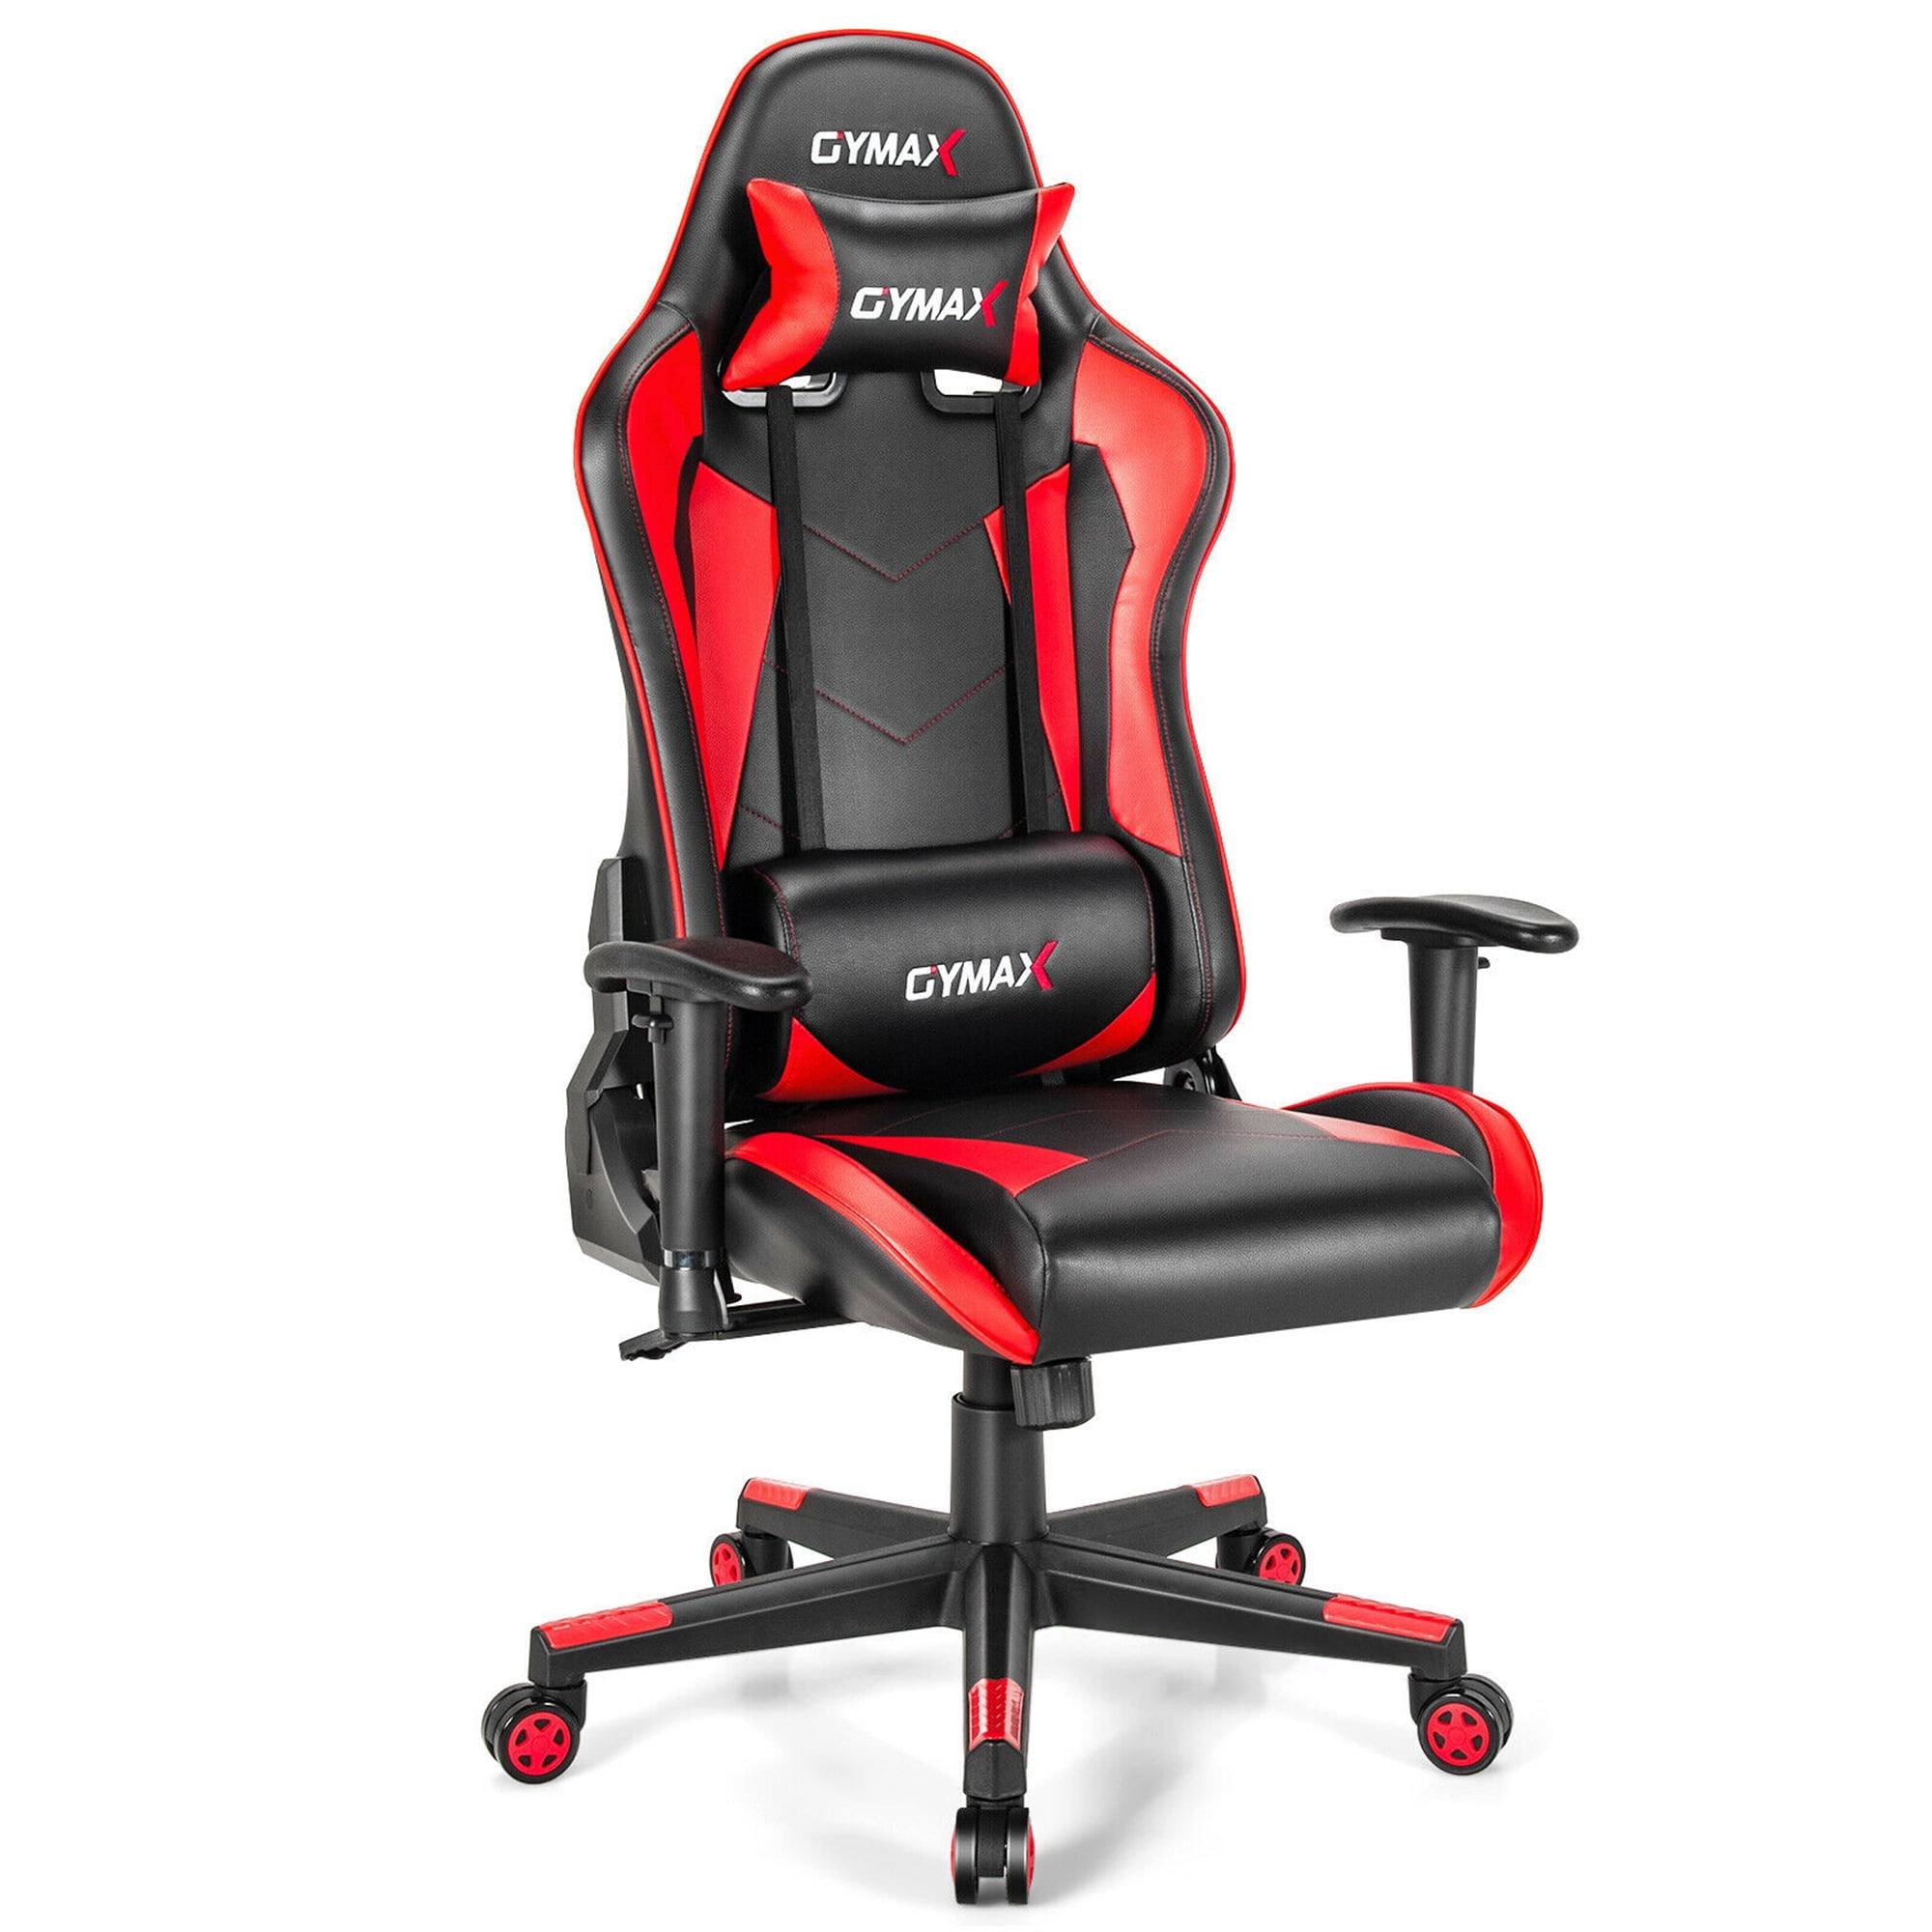 Gymax Gaming Chair Adjustable Swivel Racing Style Computer Office Chair ...